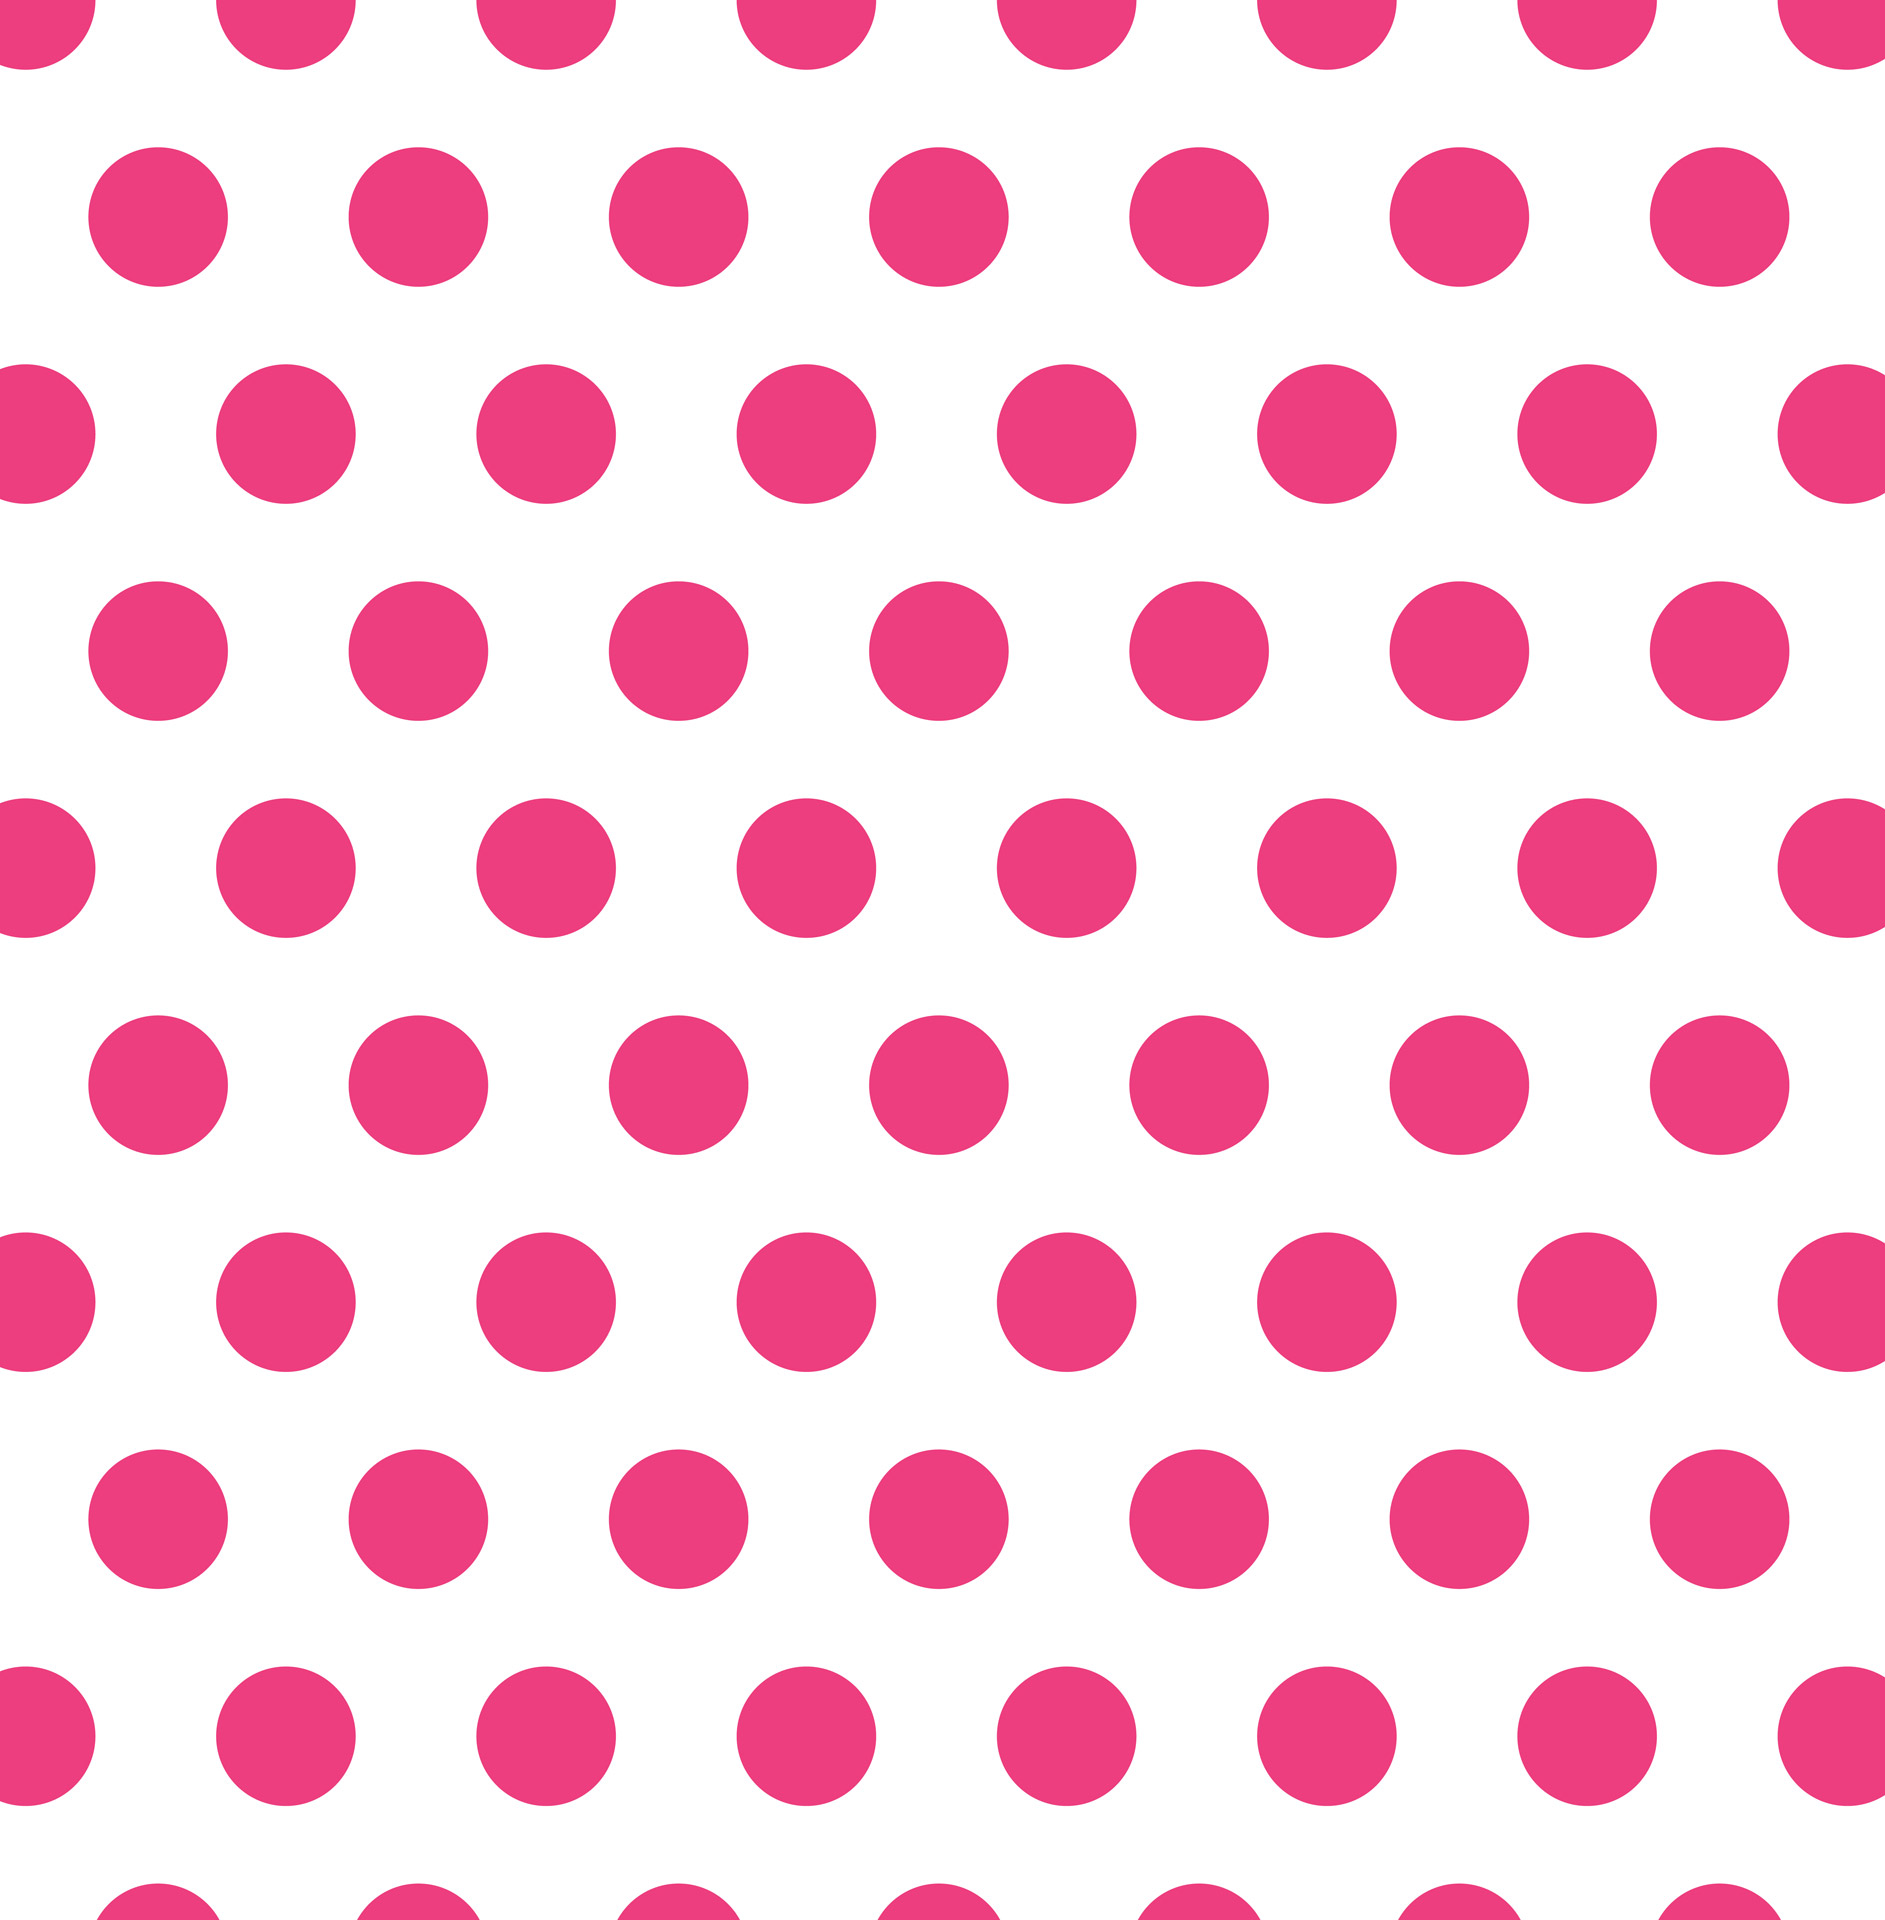 Pink polka dots background for scrapbooking